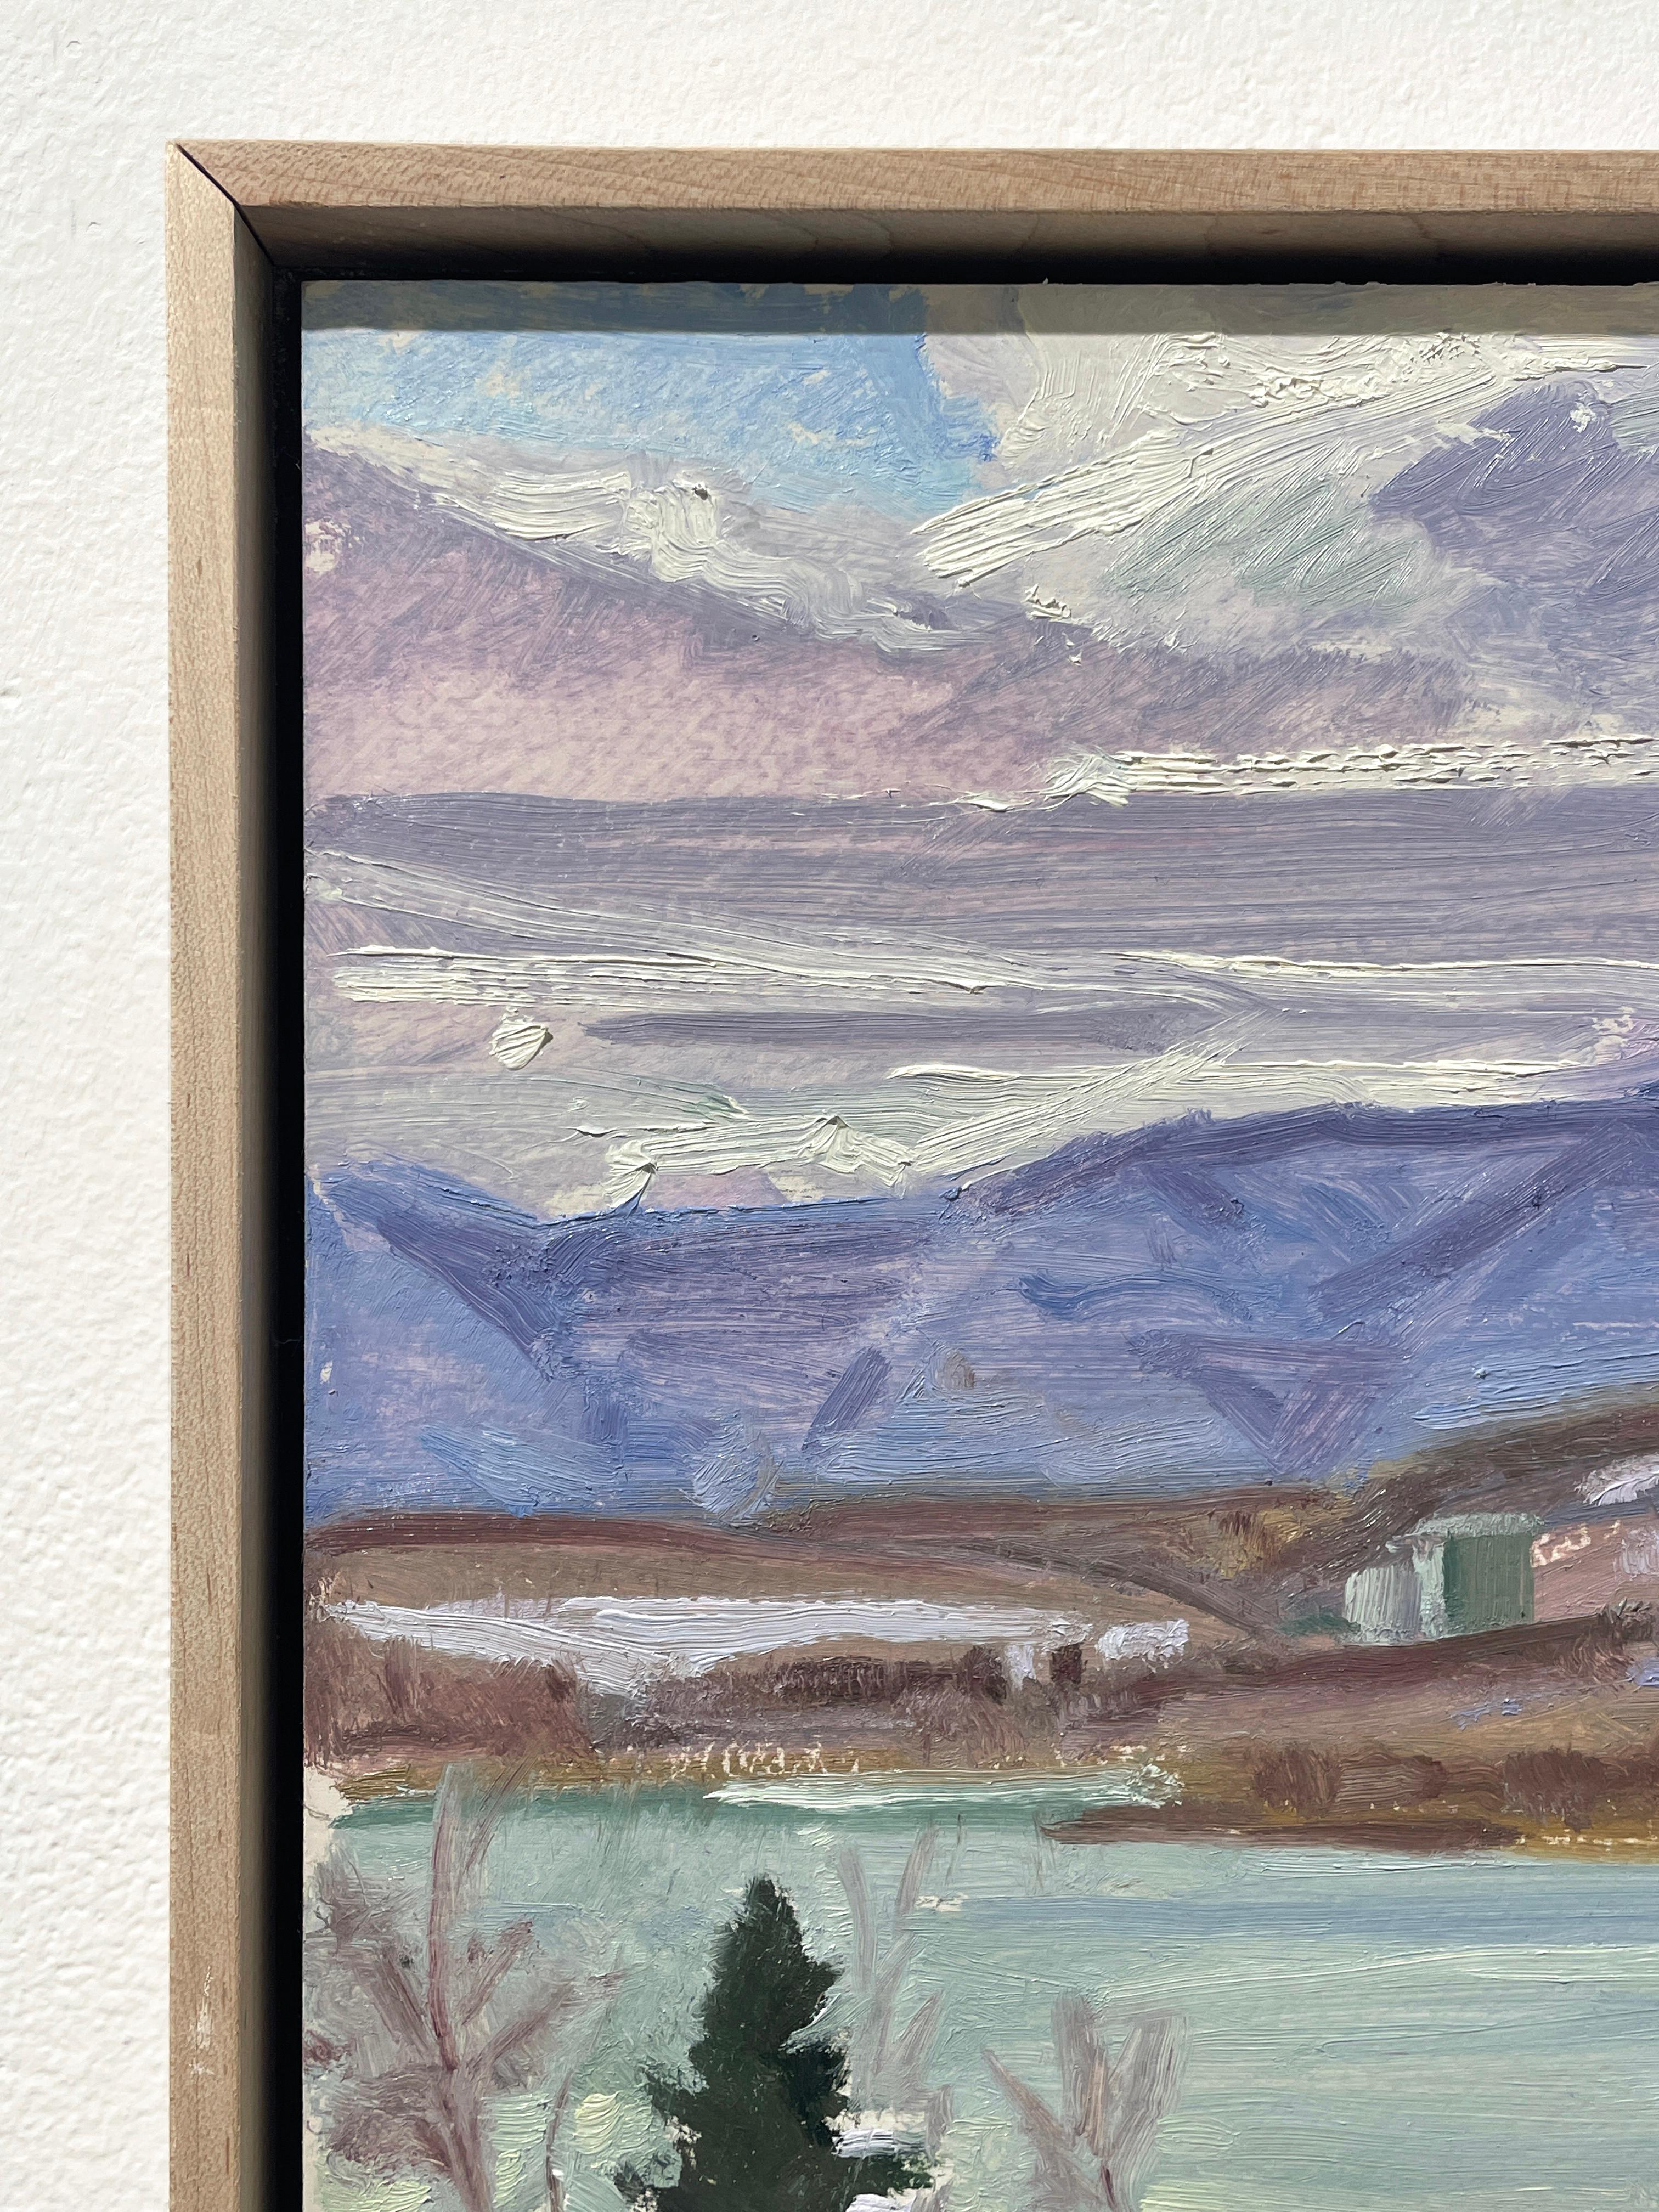 From Germantown II (Plein Air Winter Landscape of Hudson River & Mountains) - Painting by John Kelly